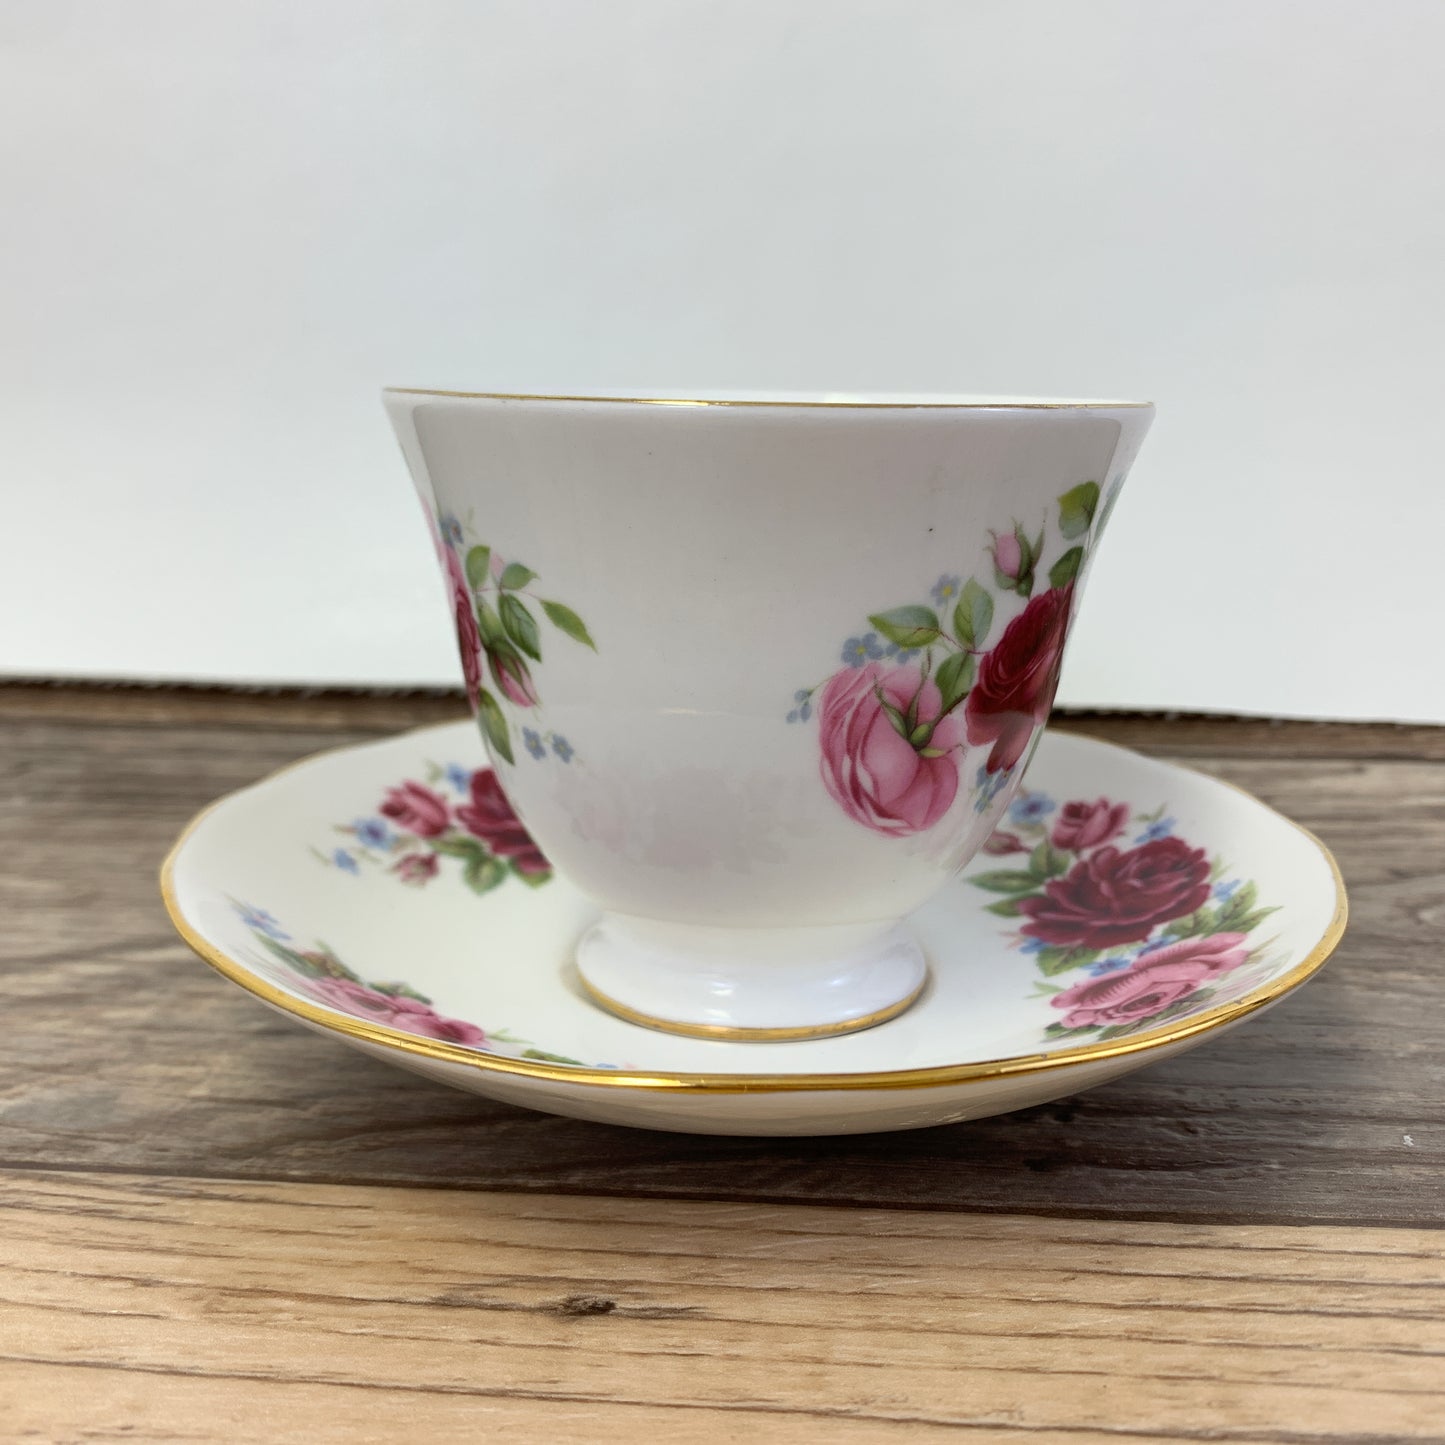 Pink, White and Red Queen Anne Vintage Teacup and Saucer Set